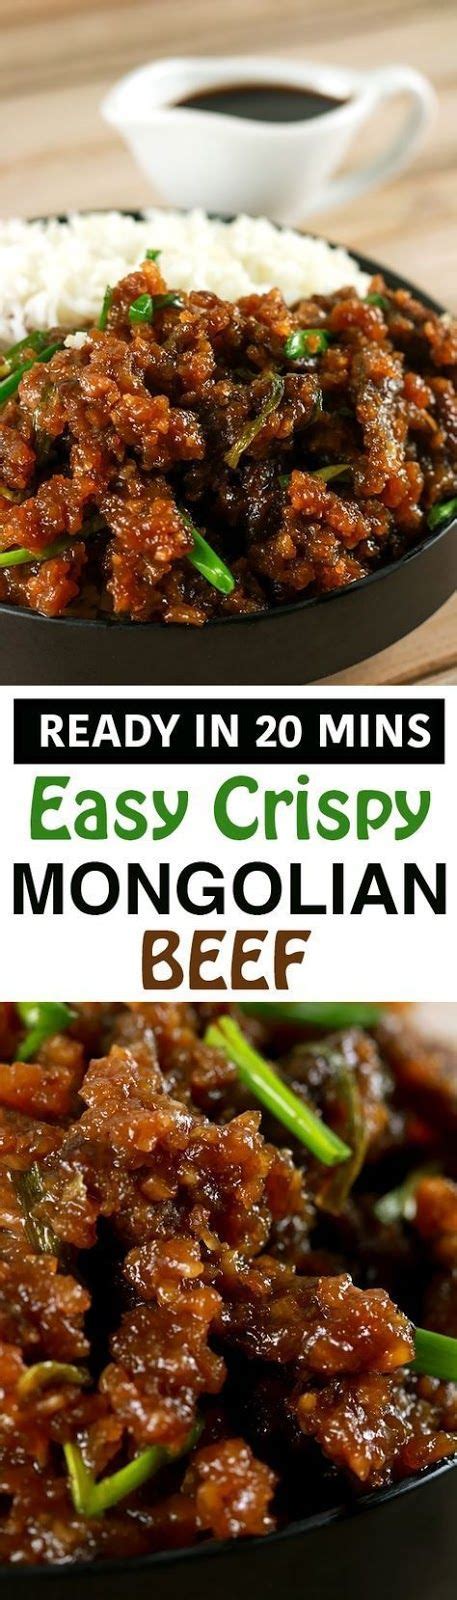 If you want to try making this in the slow cooker, we love this slow cooker mongolian beef. Easy Crispy Mongolian Beef Recipe | Recipes, Mongolian ...